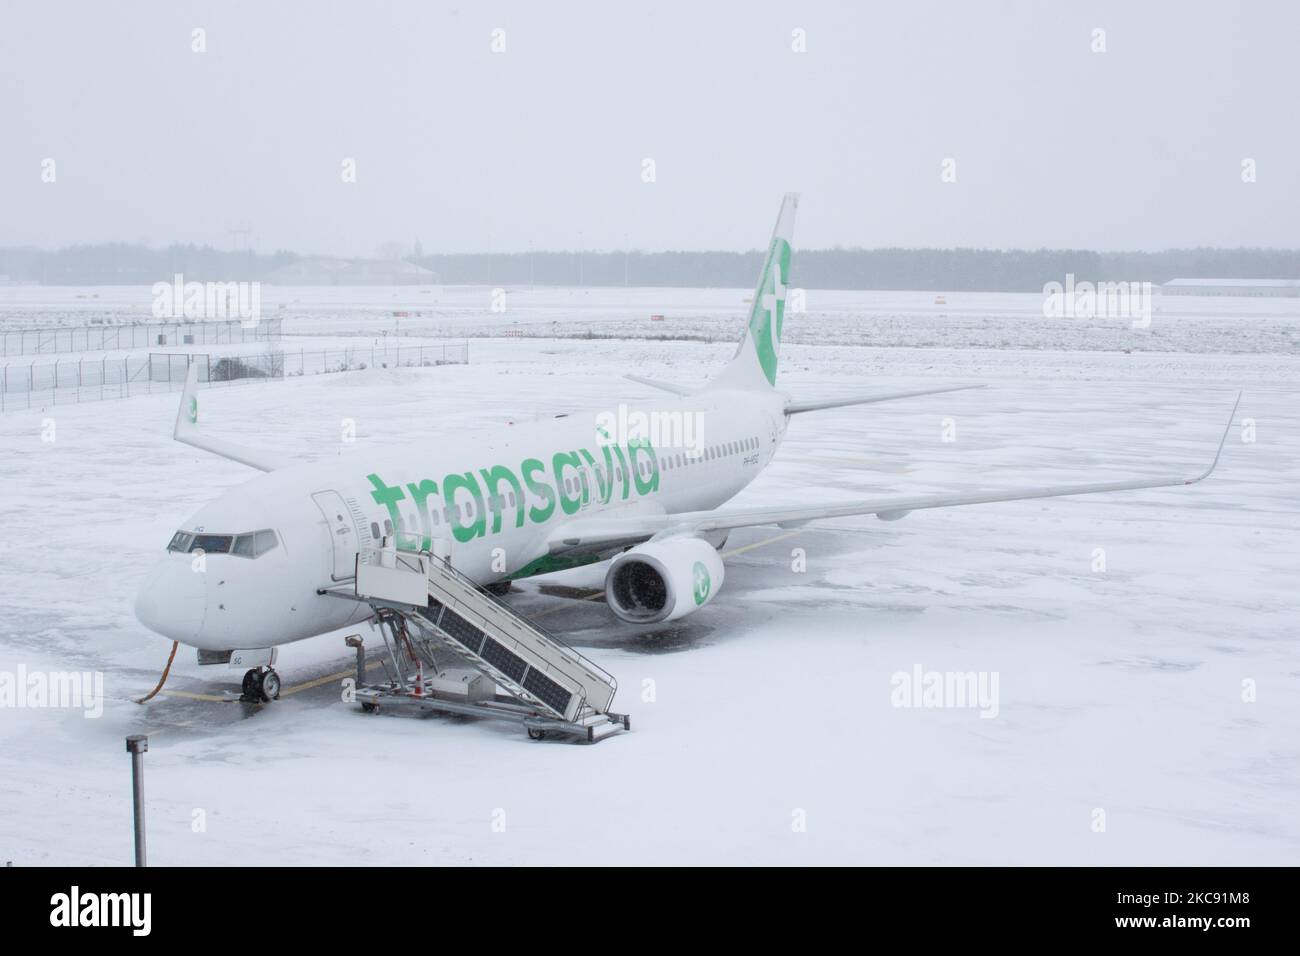 Grounded Transavia fleet, Boeing 737 in Eindhoven airport due to the snow. Snowstorm shuts down the airport of Eindhoven EIN in the Netherlands. Heavy snow fall disrupts the air traffic that caused diversions to Germany on Sunday. Blizzard from storm Darcy hit the country since Sunday morning (07.02.2021) resulting problems in public transportation. In the snow-covered Eindhoven airport, Transavia airplanes are seen grounded while heavy machinery is cleaning the taxiway and runway. Dozens of flights that were due to depart were delayed or canceled at Schiphol Airport in Amsterdam due to the ar Stock Photo